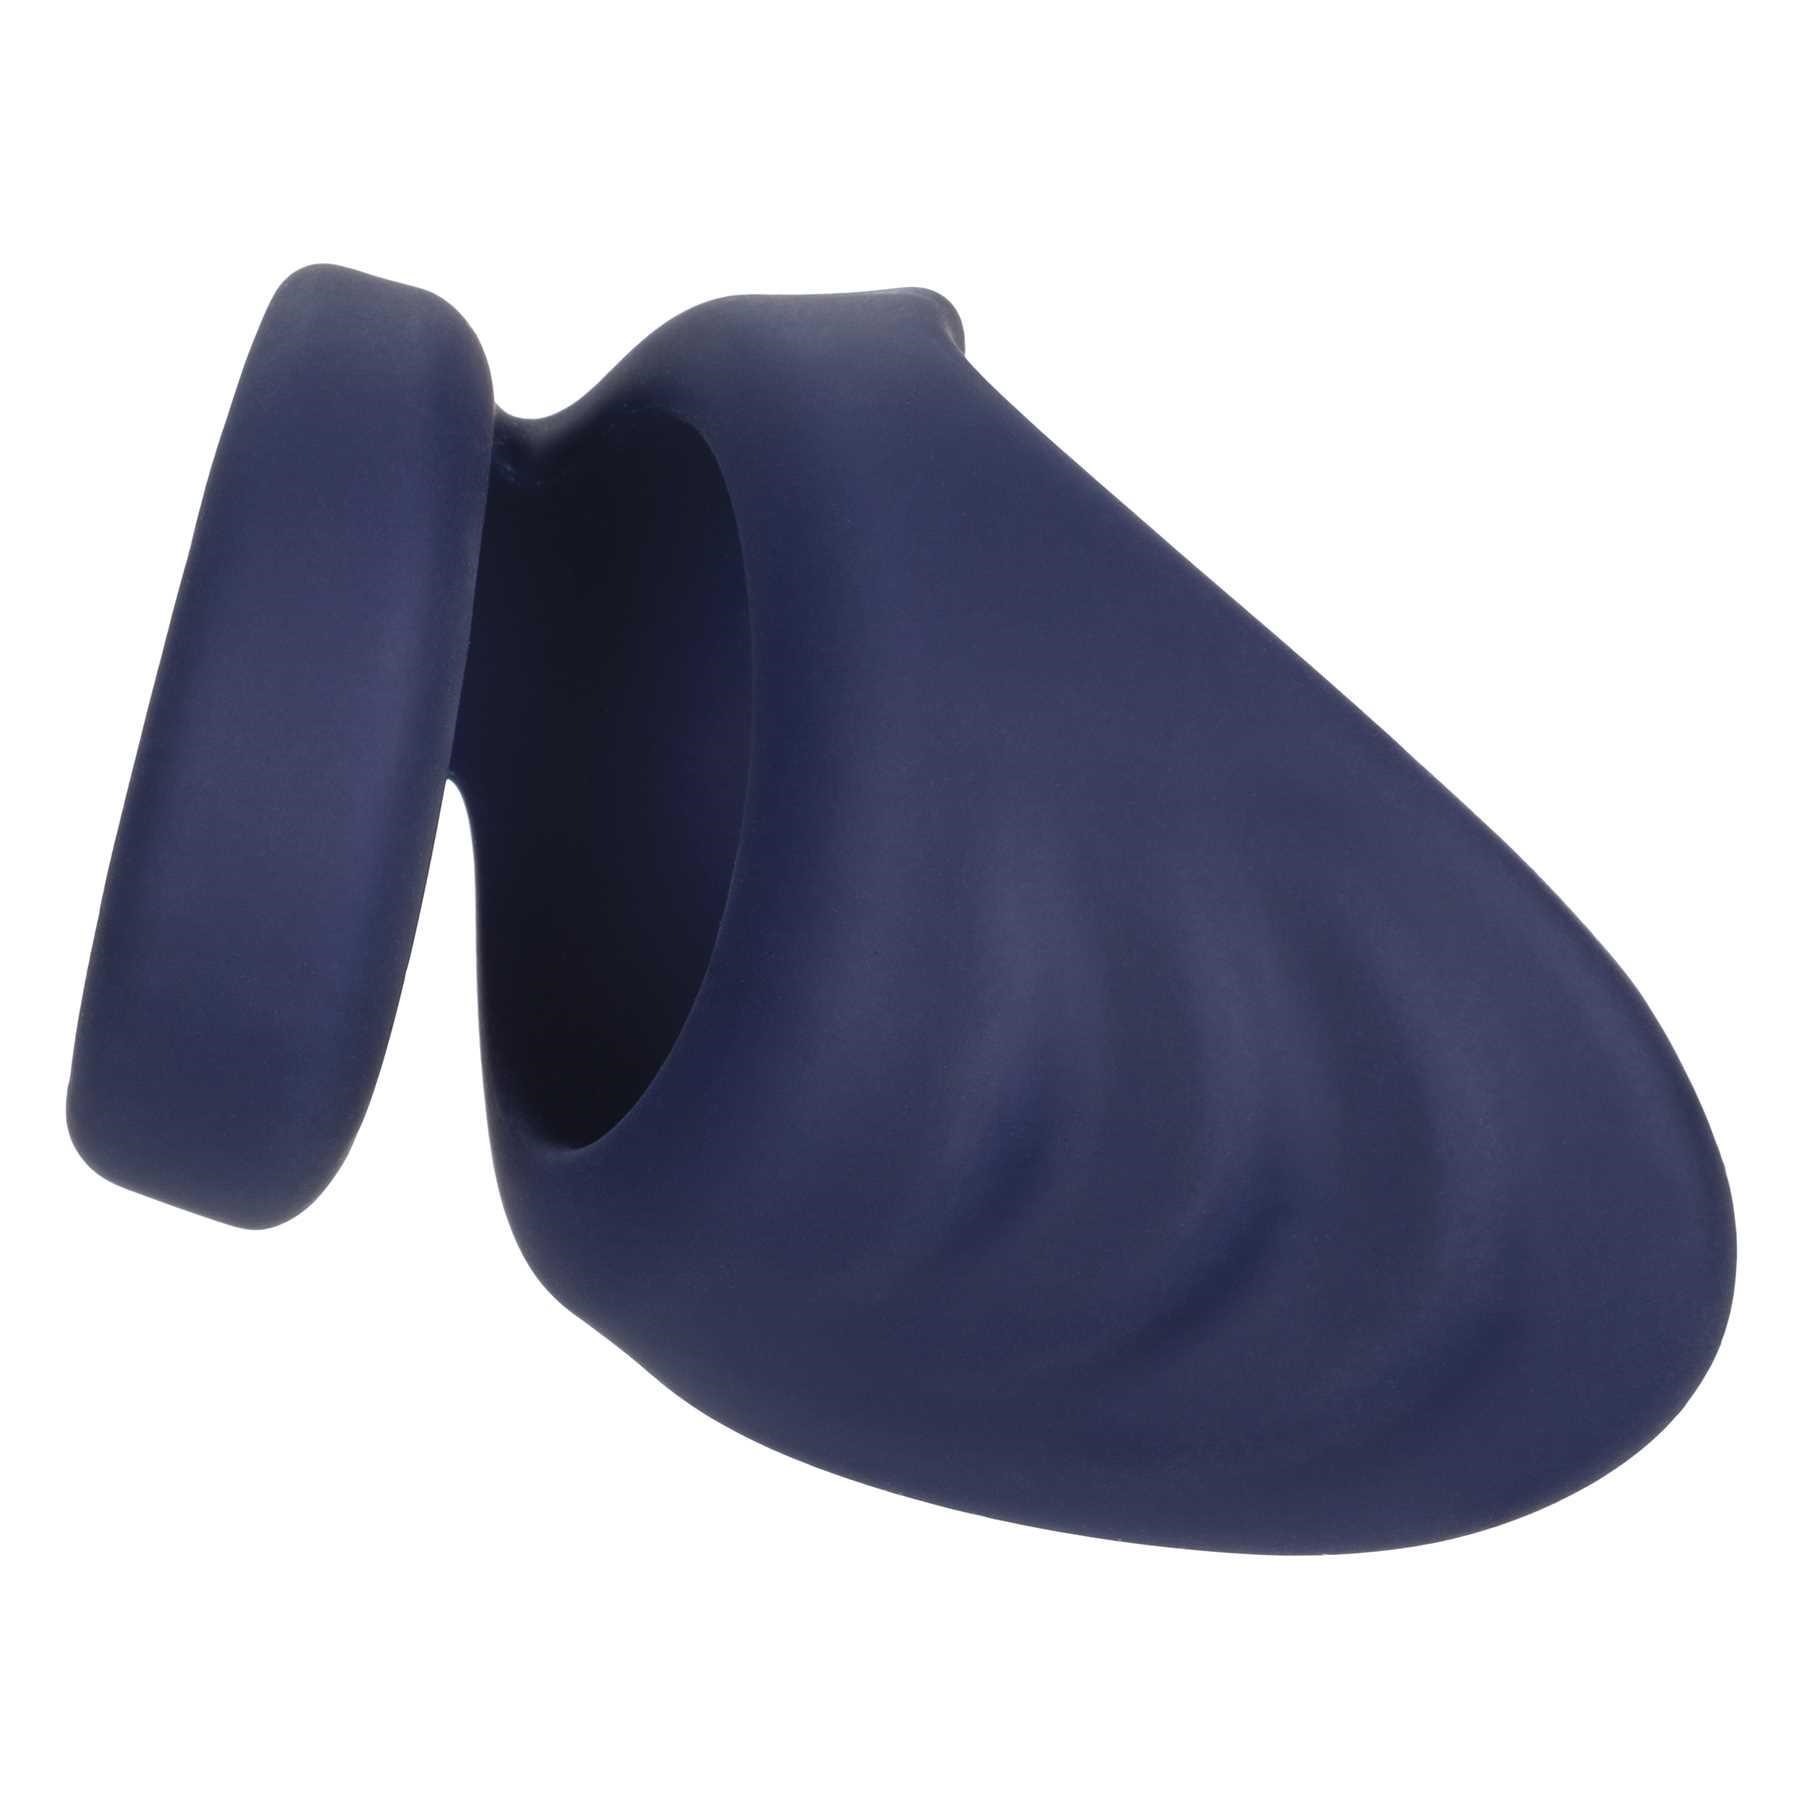 Viceroy Perineum Dual Ring product image 4